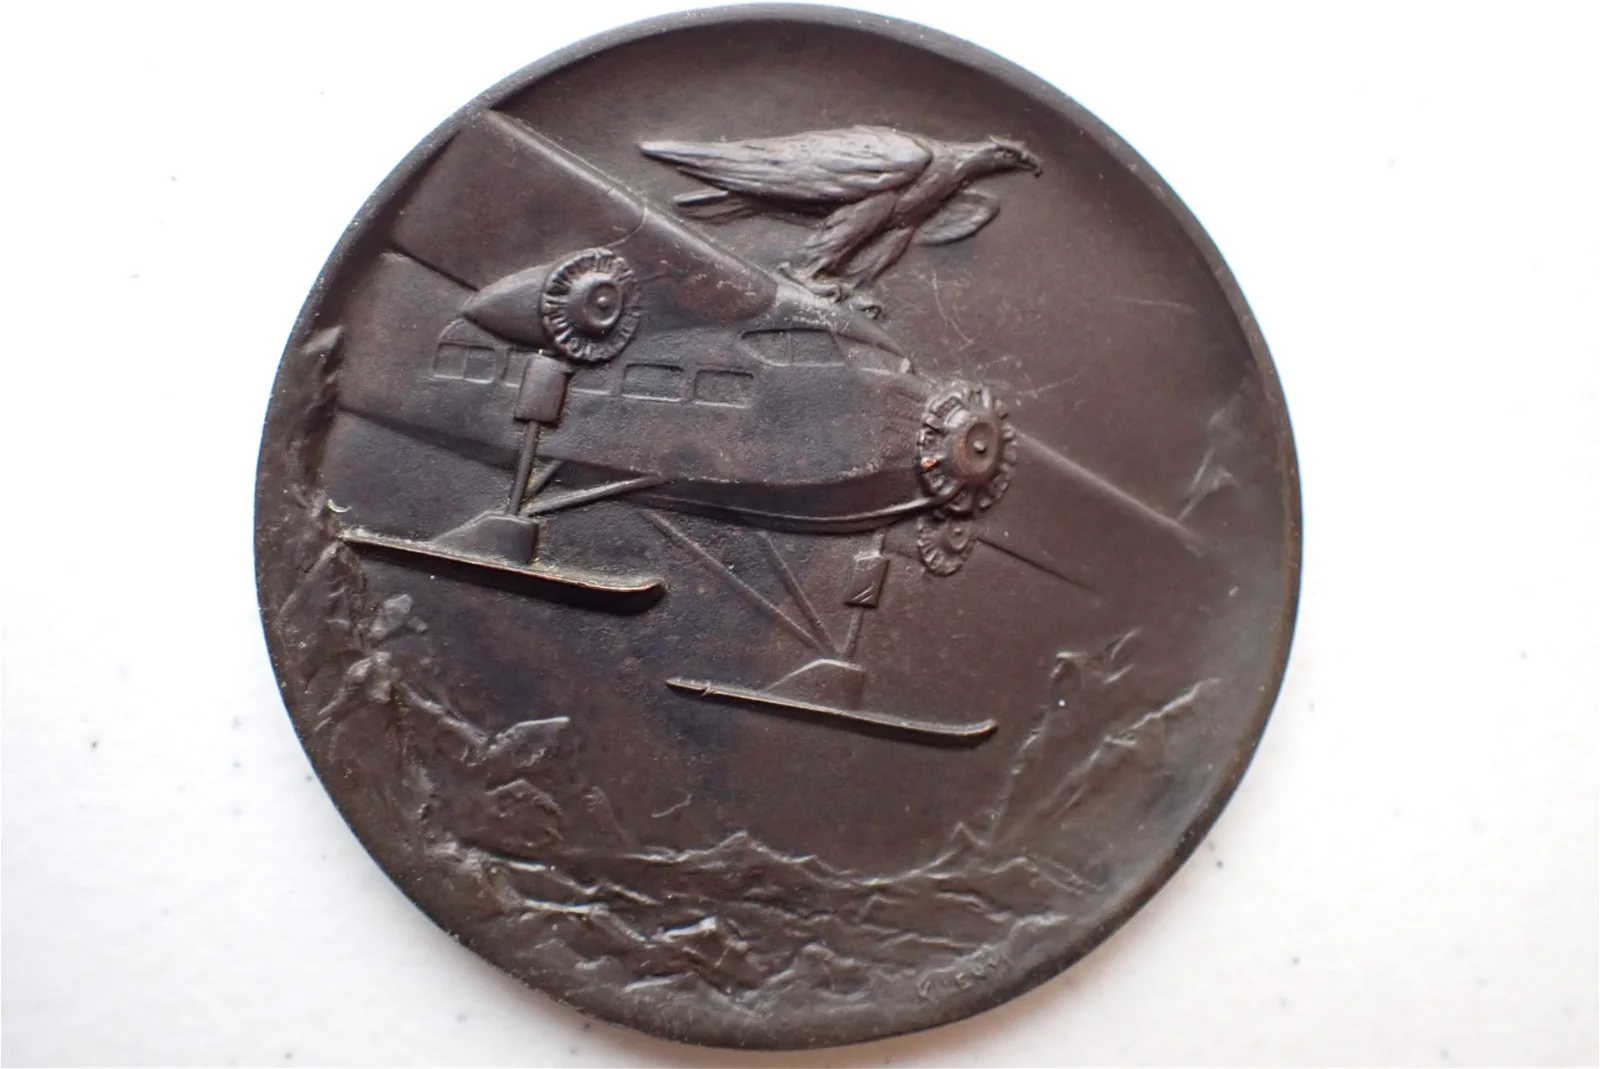 Admiral Byrd Flights Over Arctic & Antartica Bronze Medal - sold at auction for $550